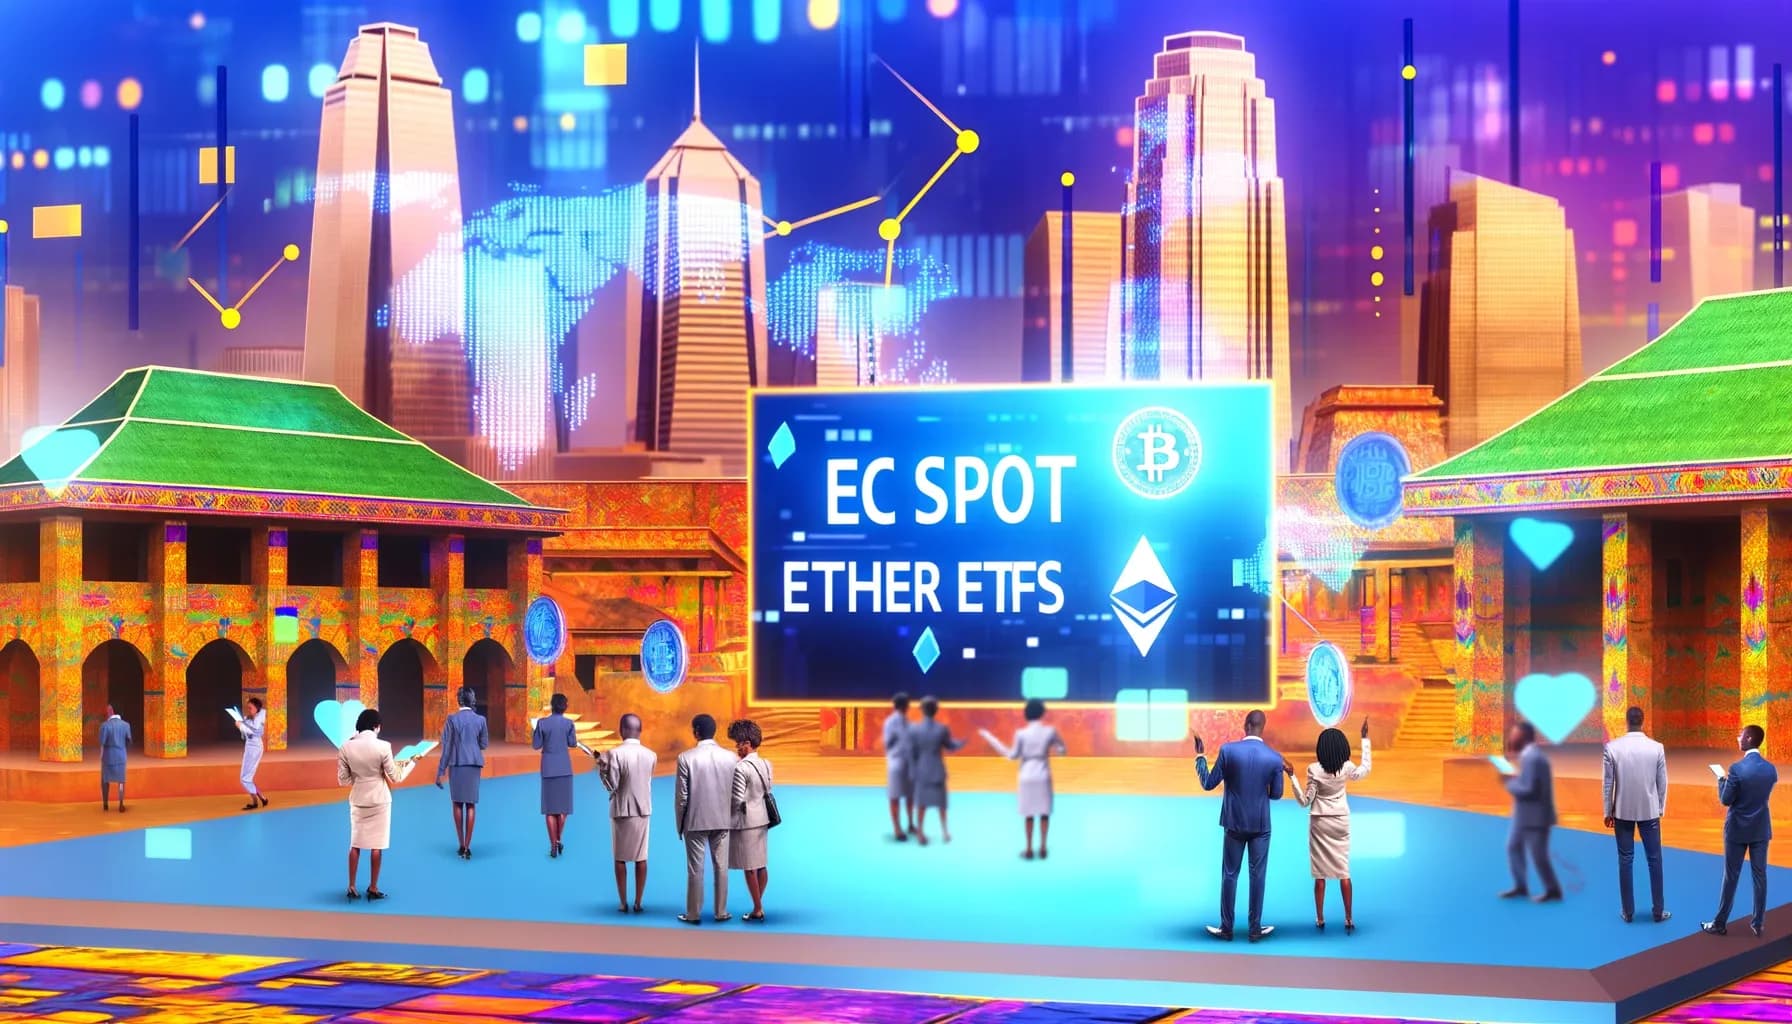 Spot Ether ETFs Approved by SEC: A Positive Signal for Africa’s Financial Landscape